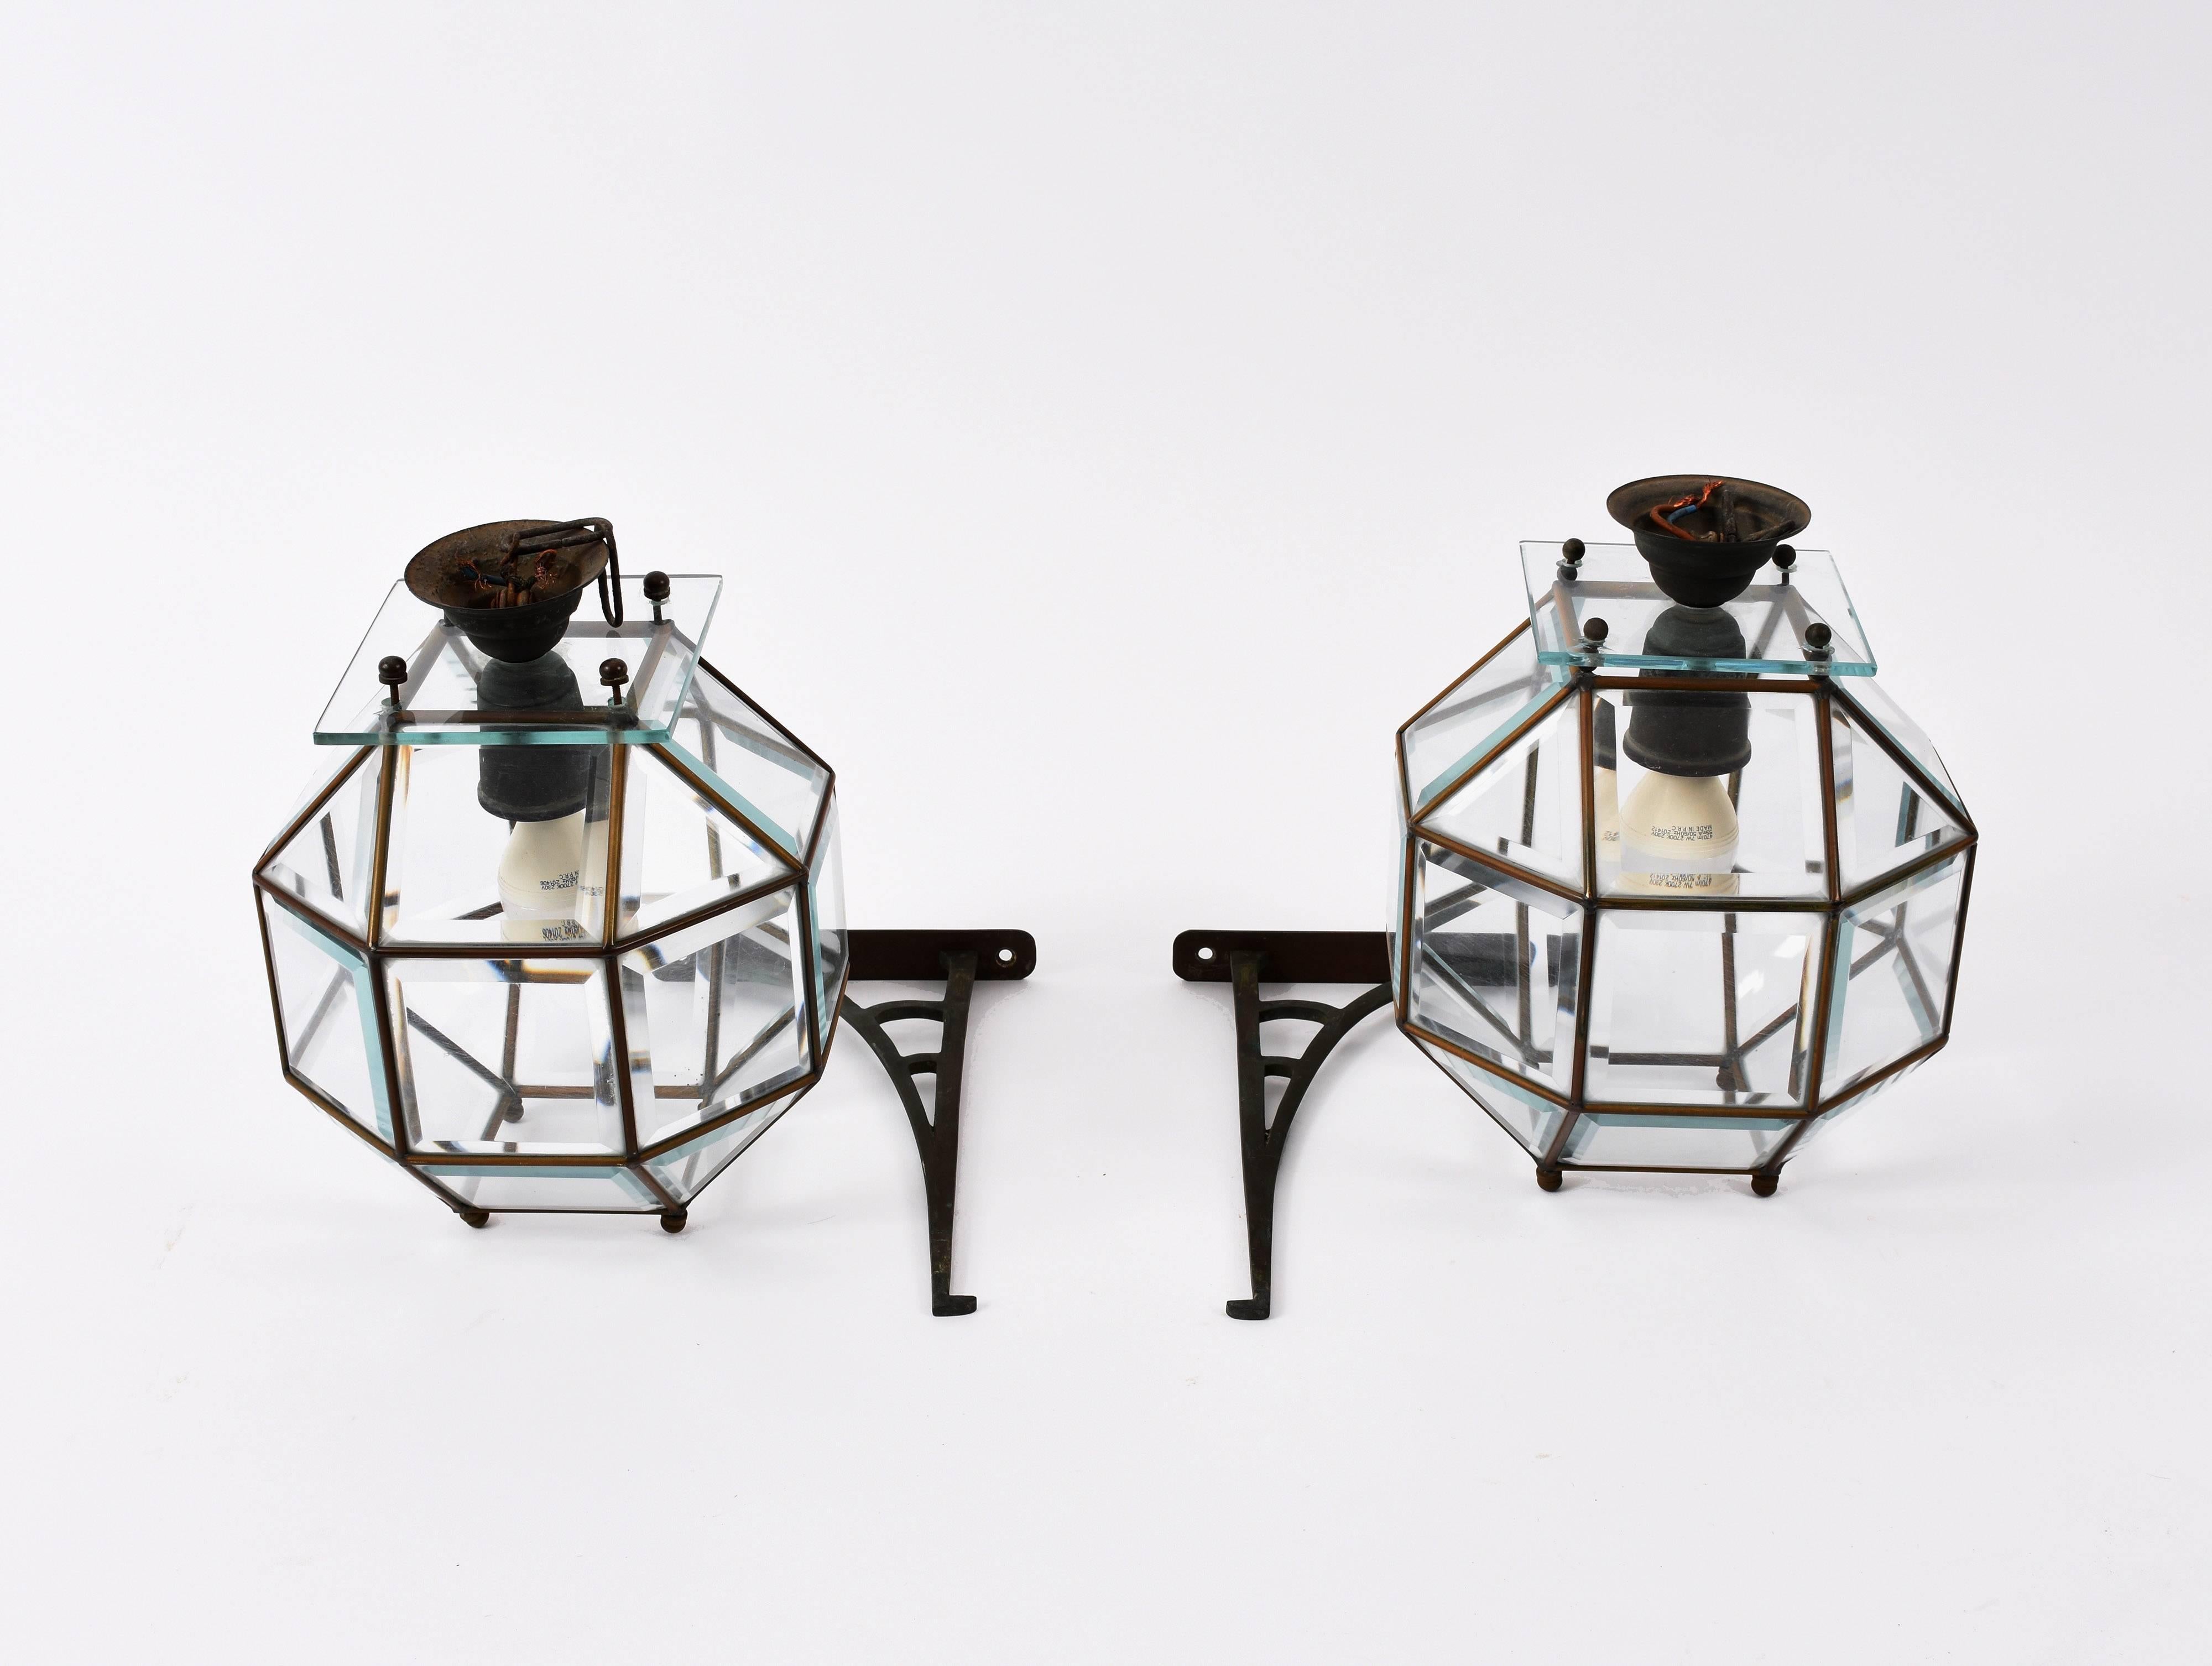 20th Century Lantern Lamps in Crystal and Leaded Brass, 1900s, Italian Lighting